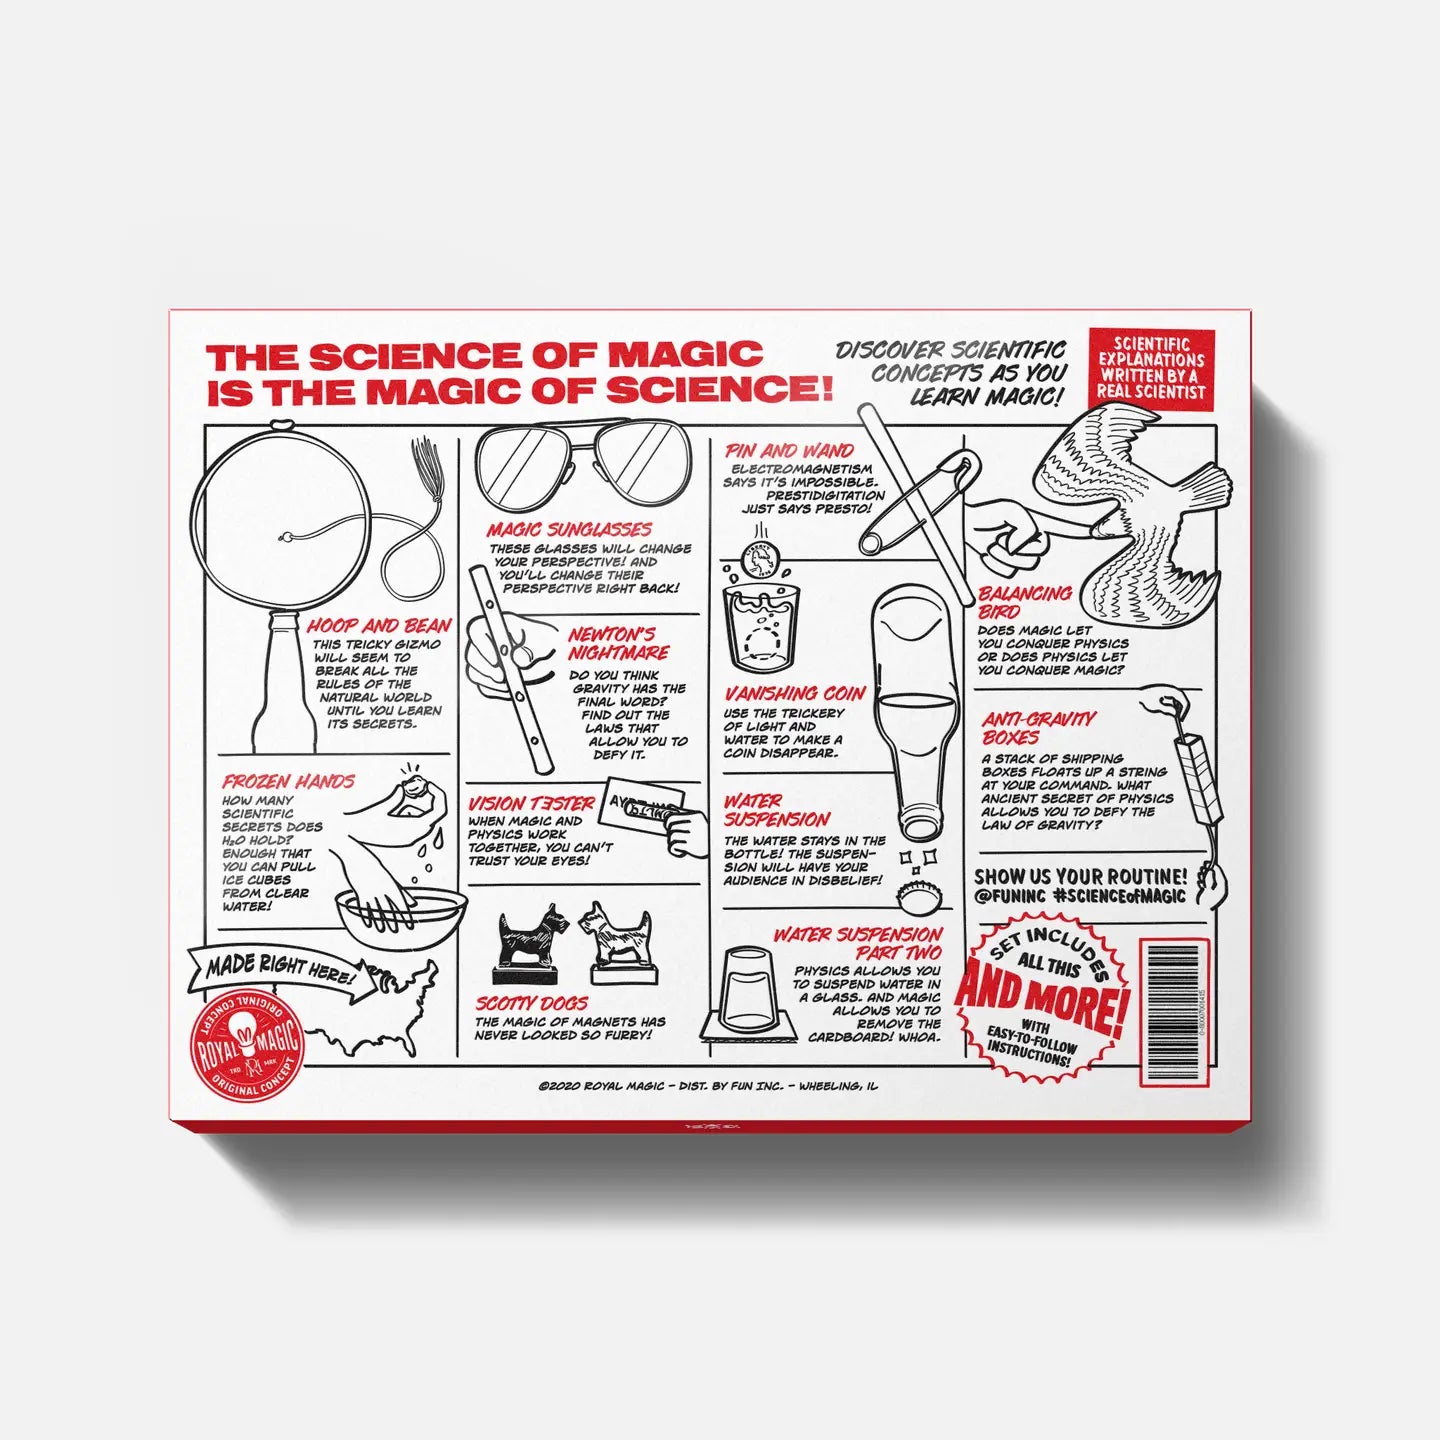 Fun with the Science of Magic Kit